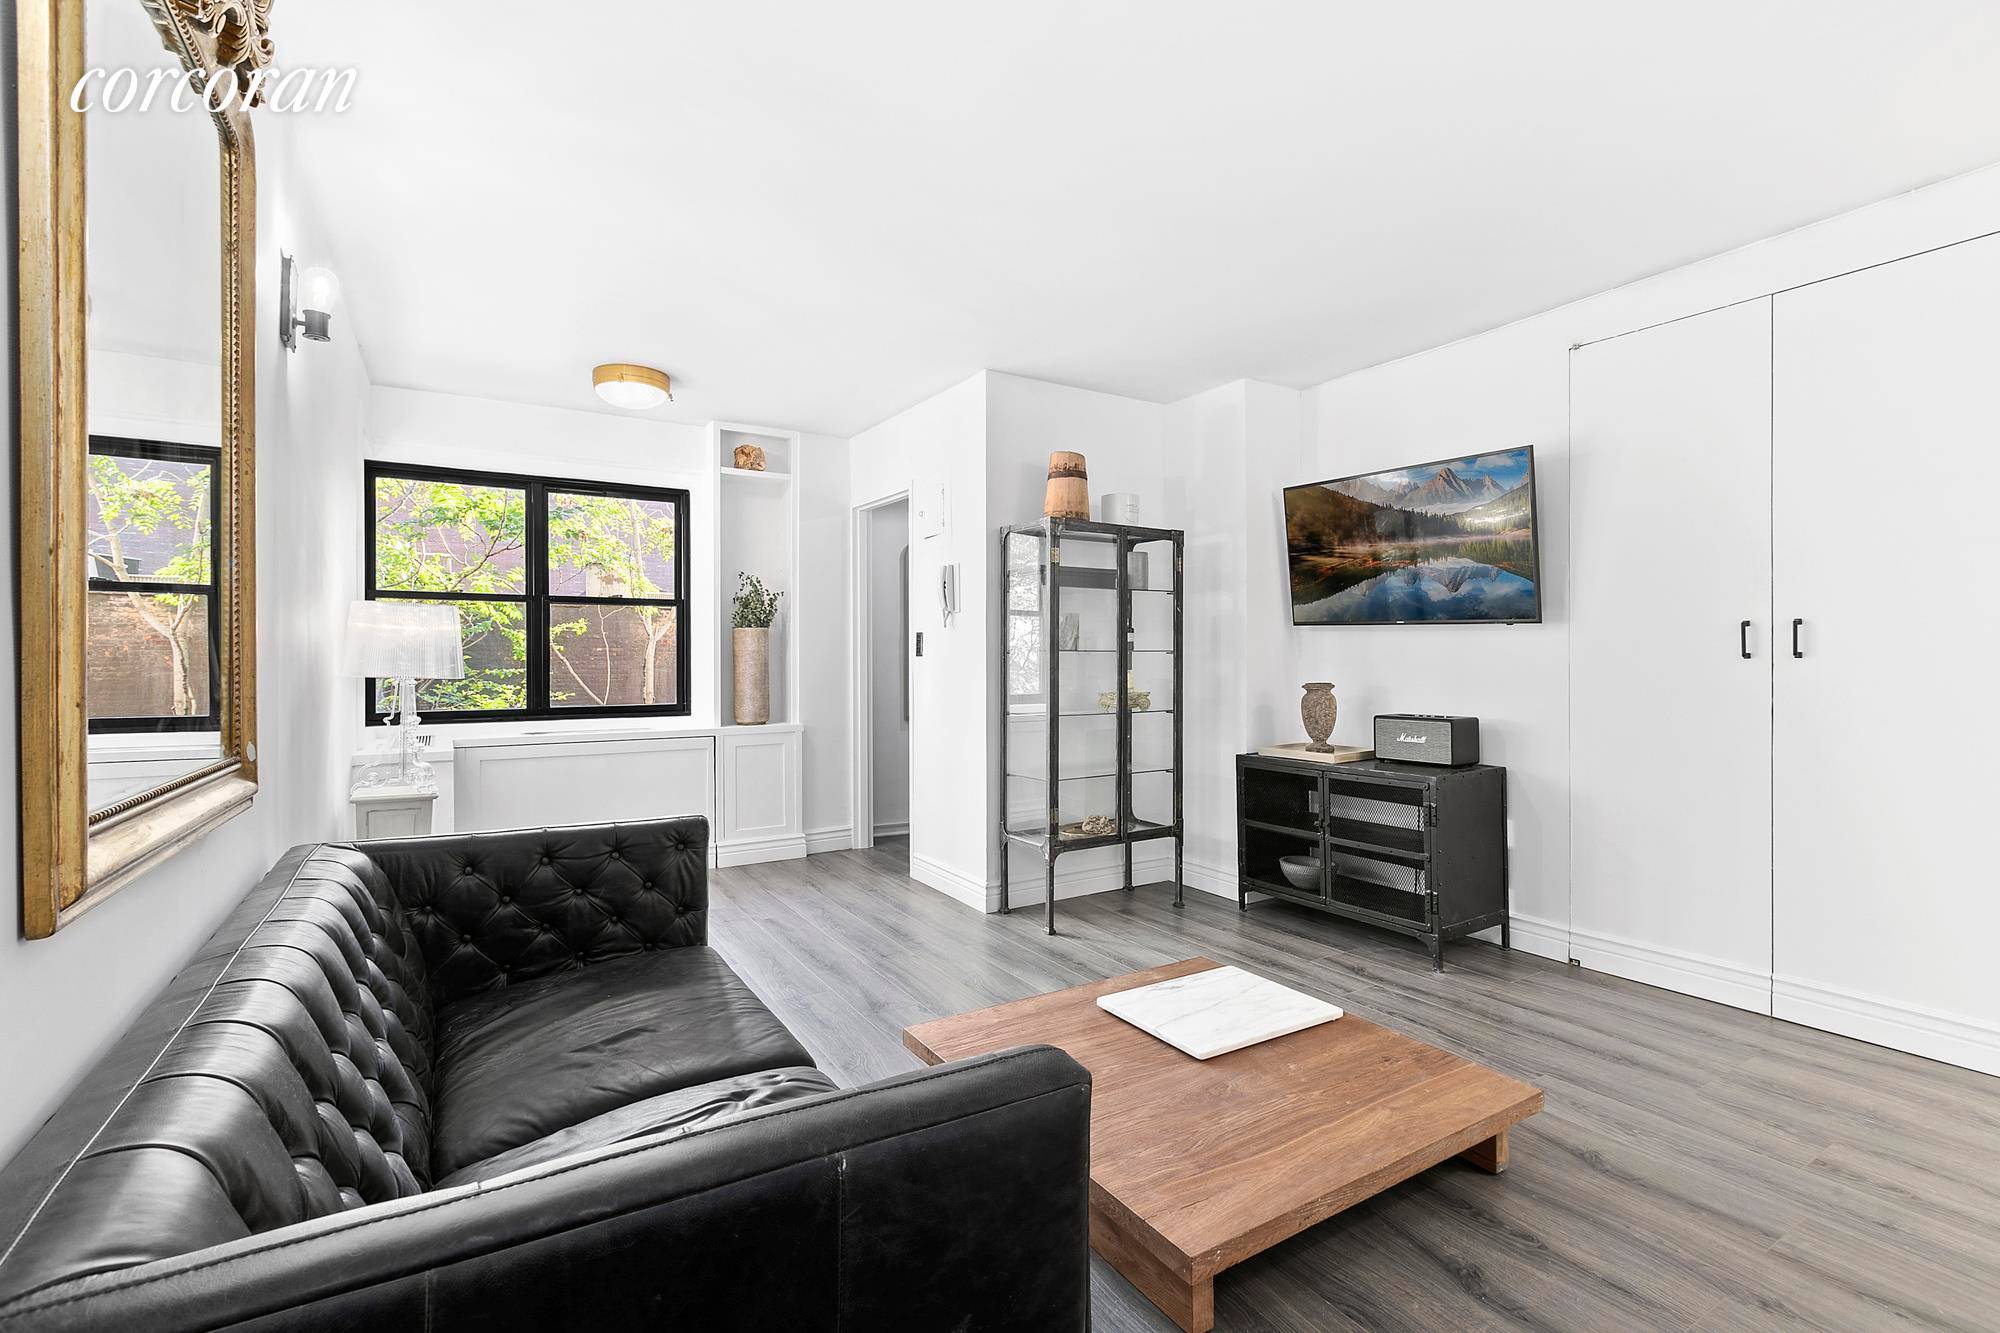 New Price ! Chic and sophisticated designer studio in the heart of the West Village.